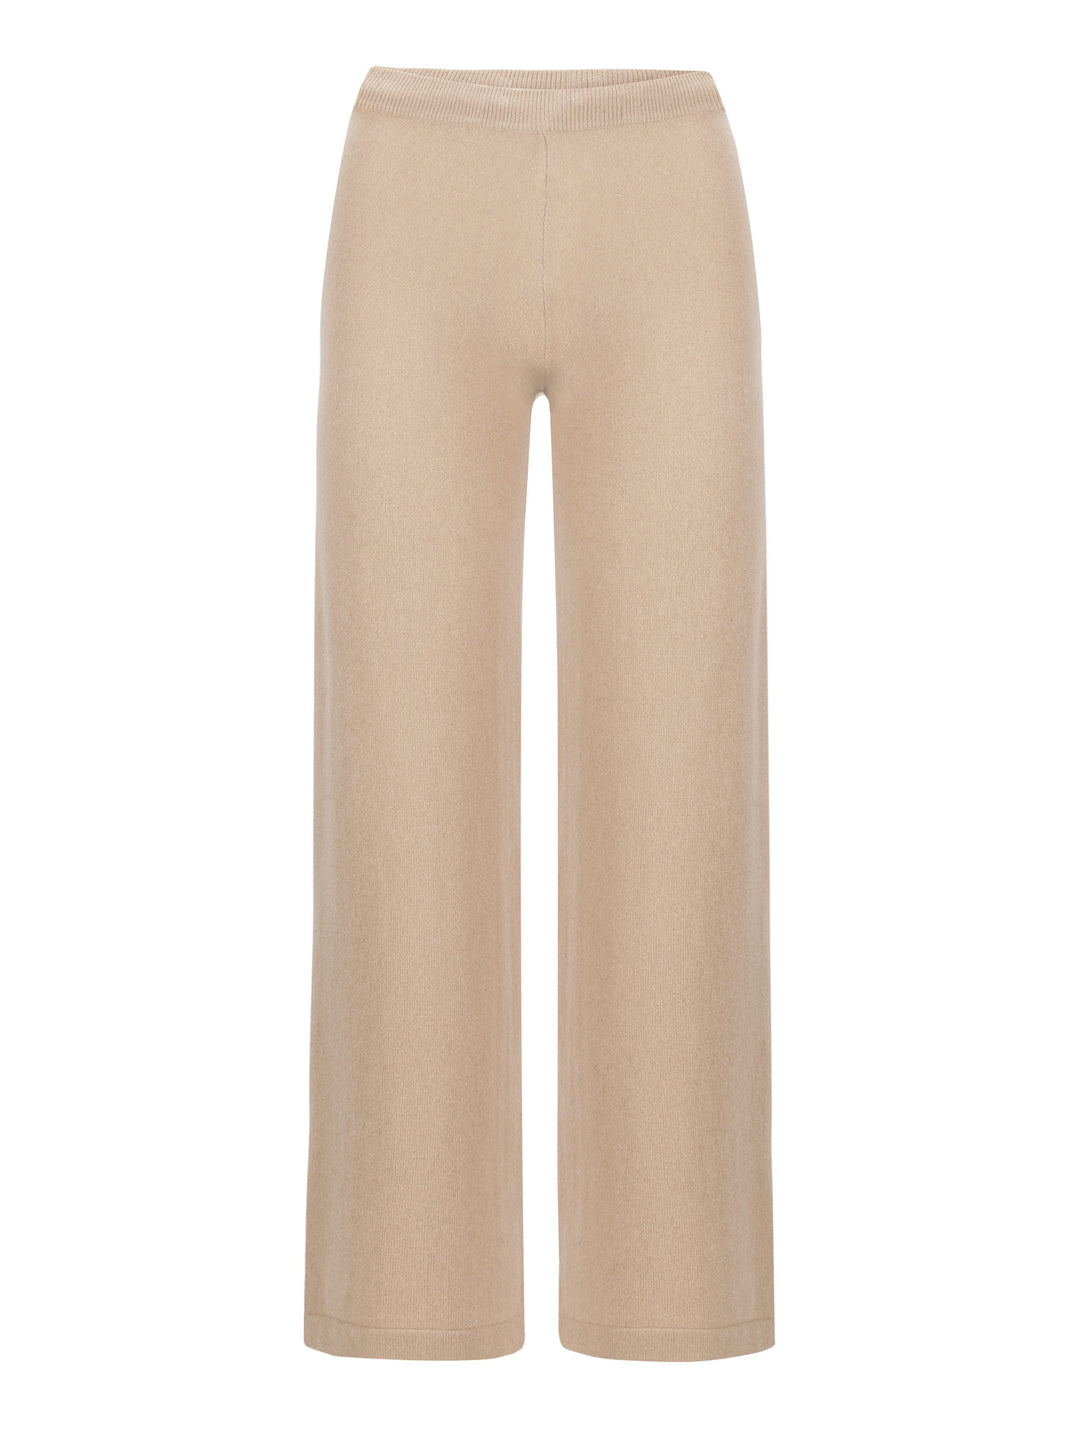 "Fancy" pants in 100% cashmere from Kashmina